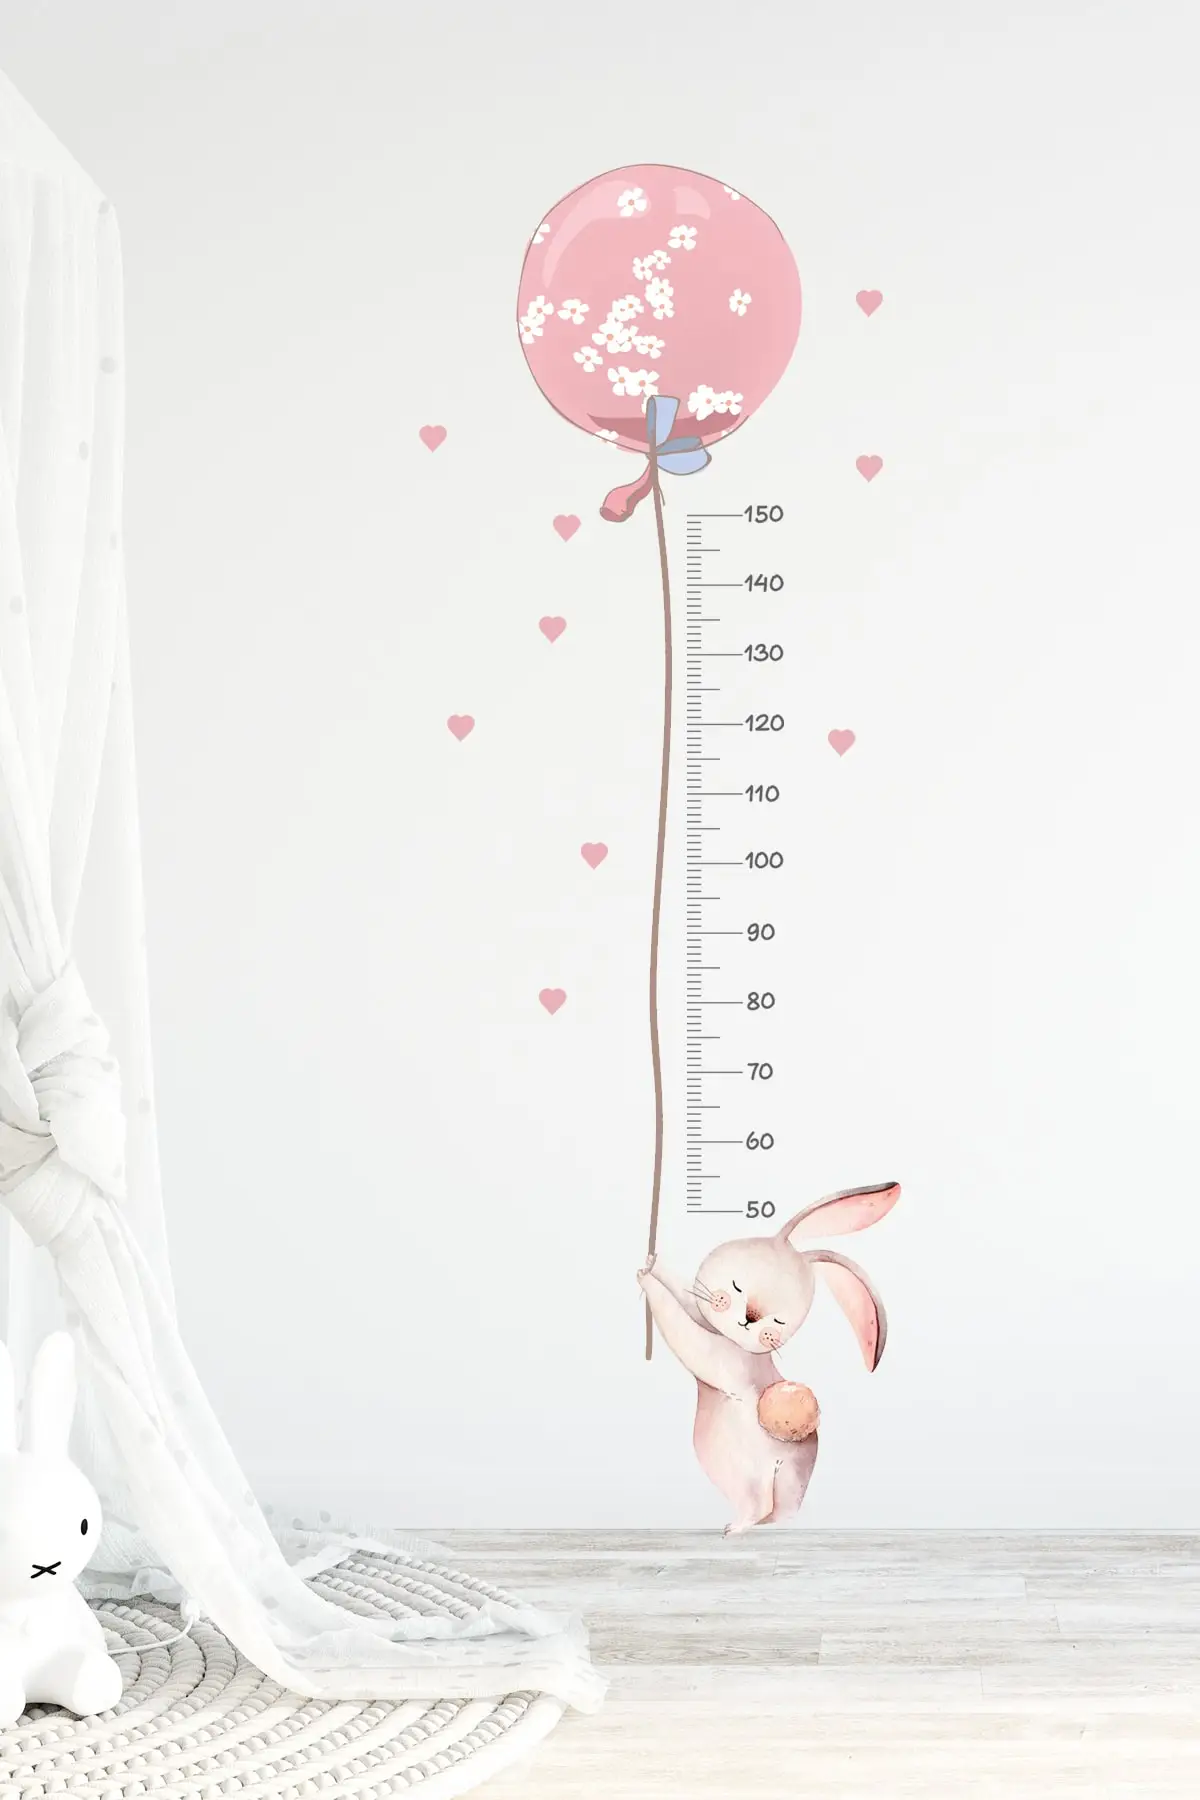 

Air bubble Rabbit Stature Meter Wall Sticker Set Elegant Design Welcome Quality Useful Wink Attractive Trend 2021 New Fashion For Kids Great Wall Sticker Sweet Rabbit Height Measuring Model For Kids Room